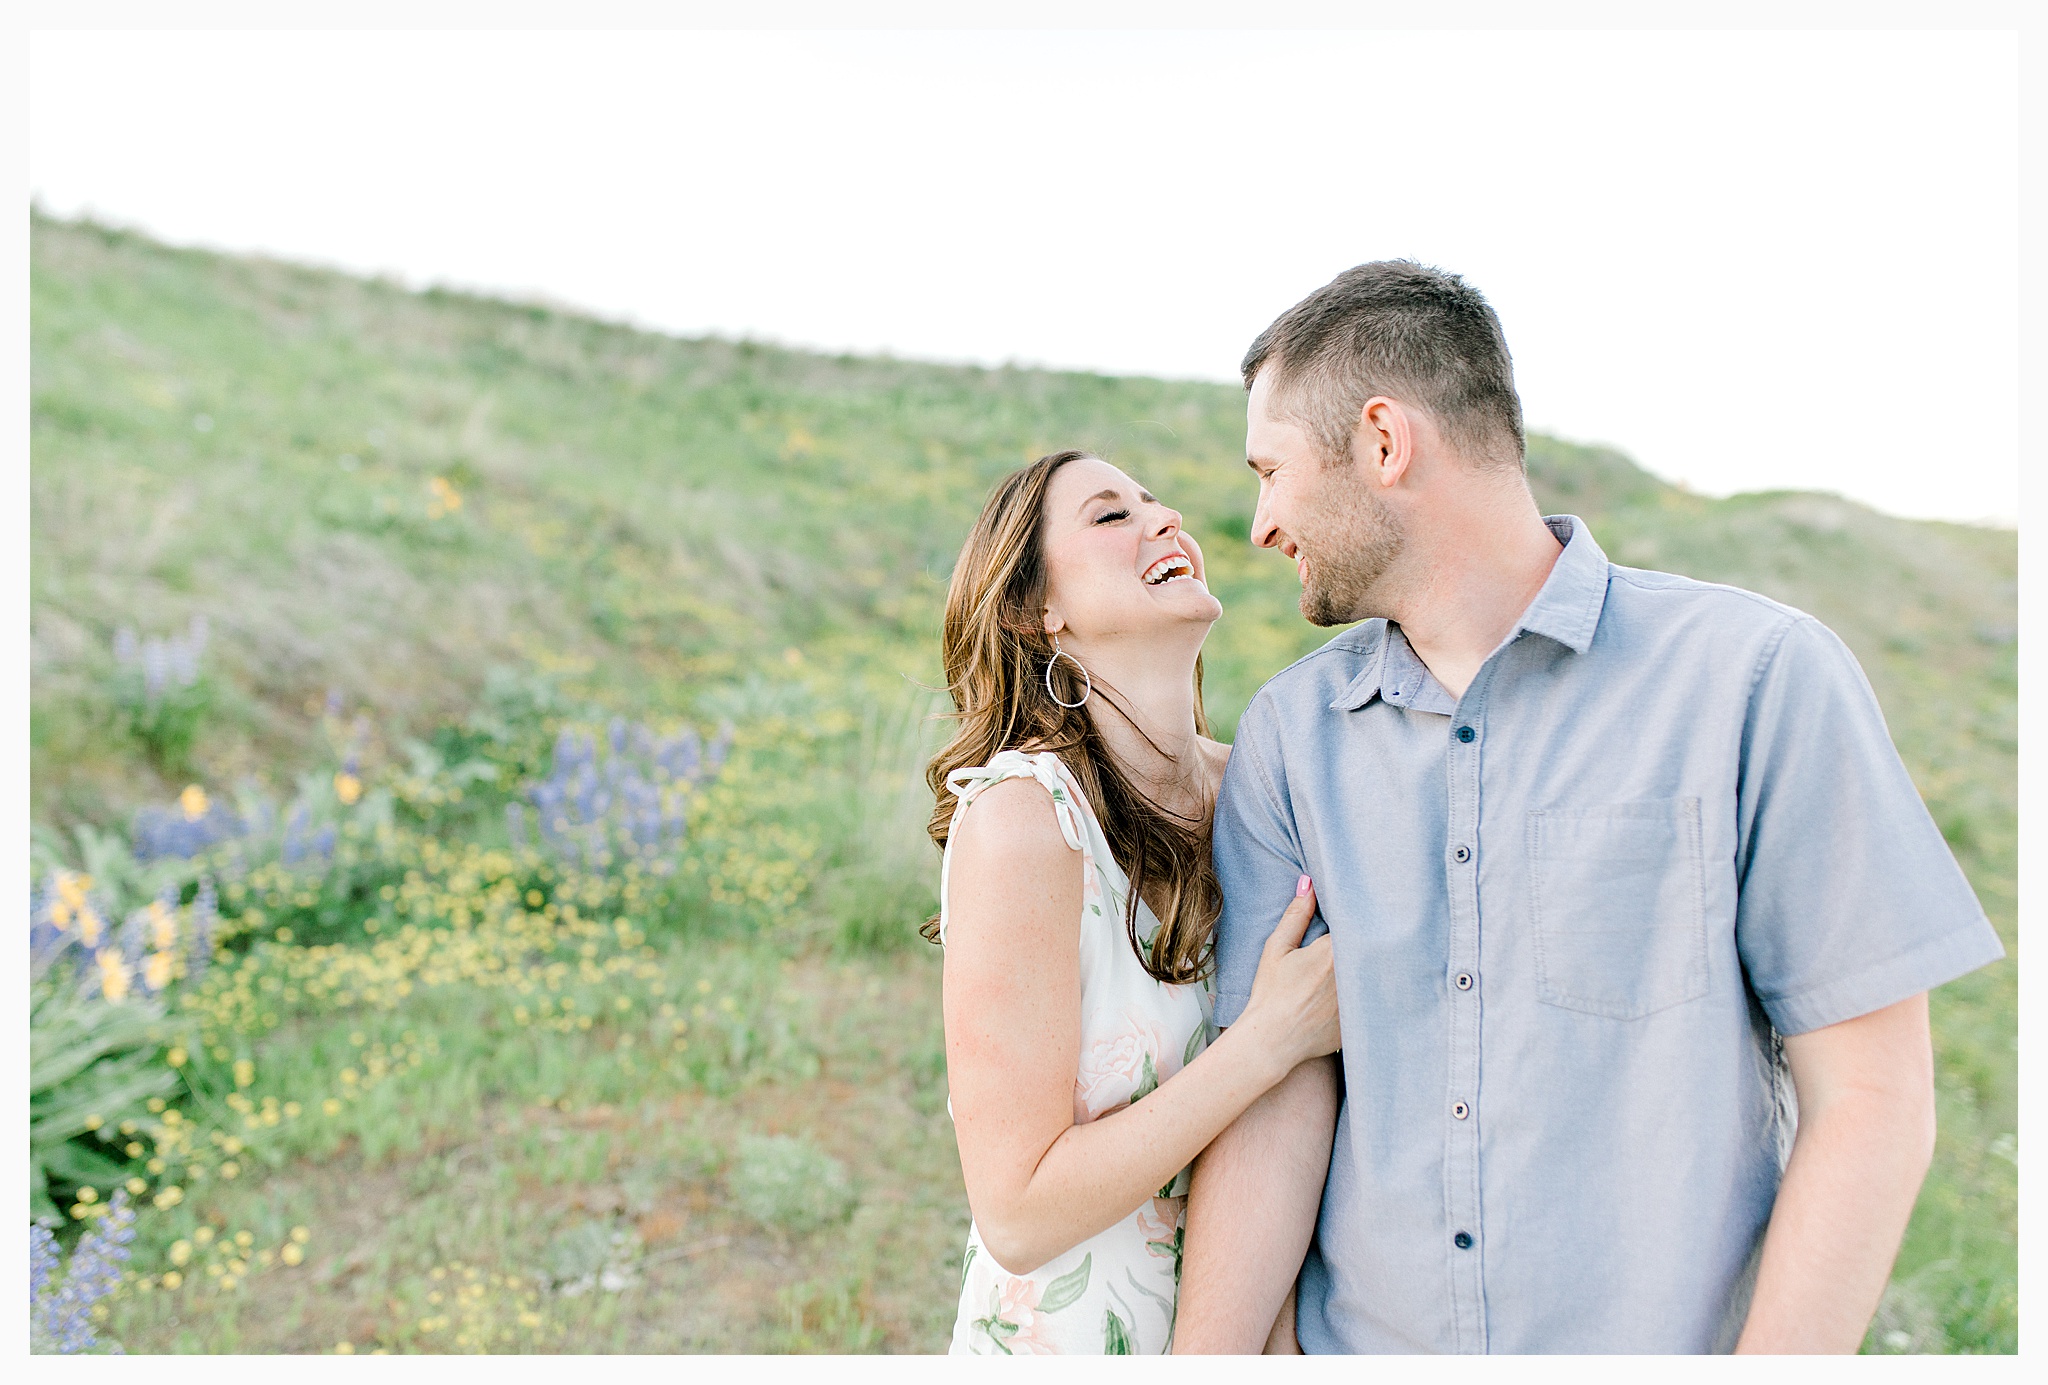 Engagement session amongst the wildflowers in Wenatchee, Washington | Engagement Session Outfit Inspiration for Wedding Photography with Emma Rose Company | Light and Airy PNW Photographer, Seattle Bride_0005.jpg